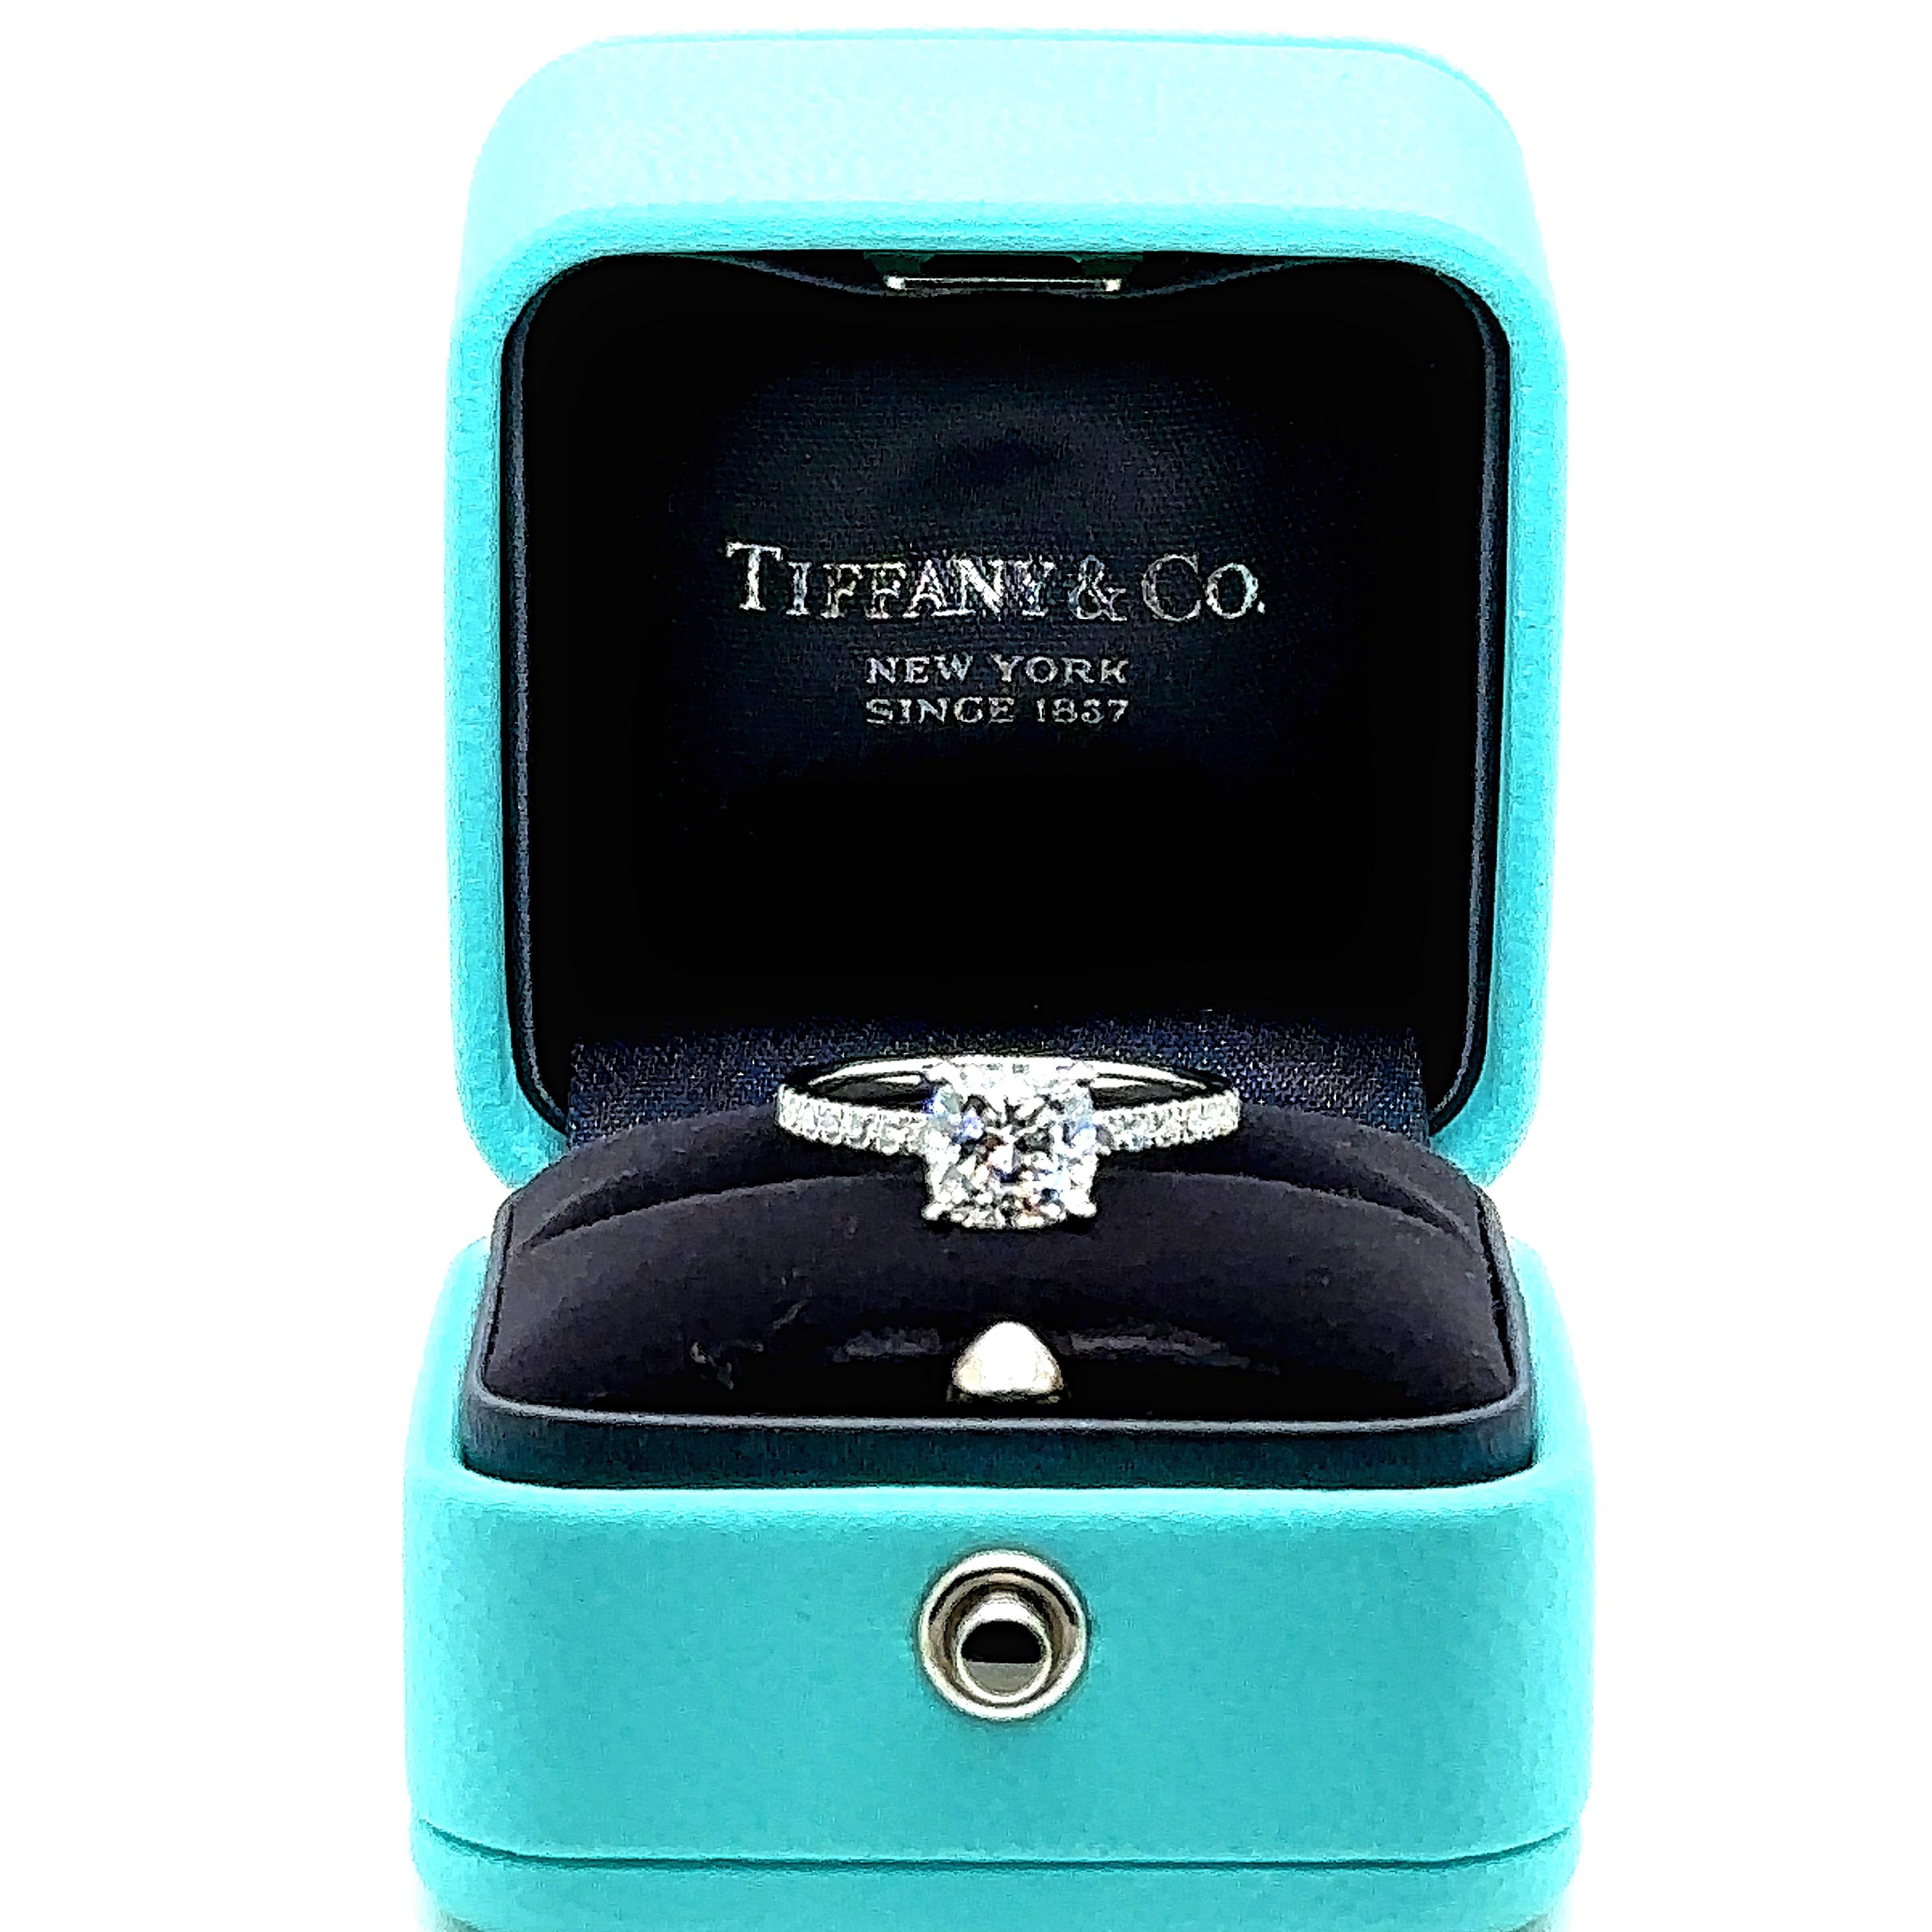 Tiffany & Co. Novo 1.47 Tcw Cushion Diamond Eng Ring Pave Diamond Platinum Band In Excellent Condition For Sale In San Diego, CA